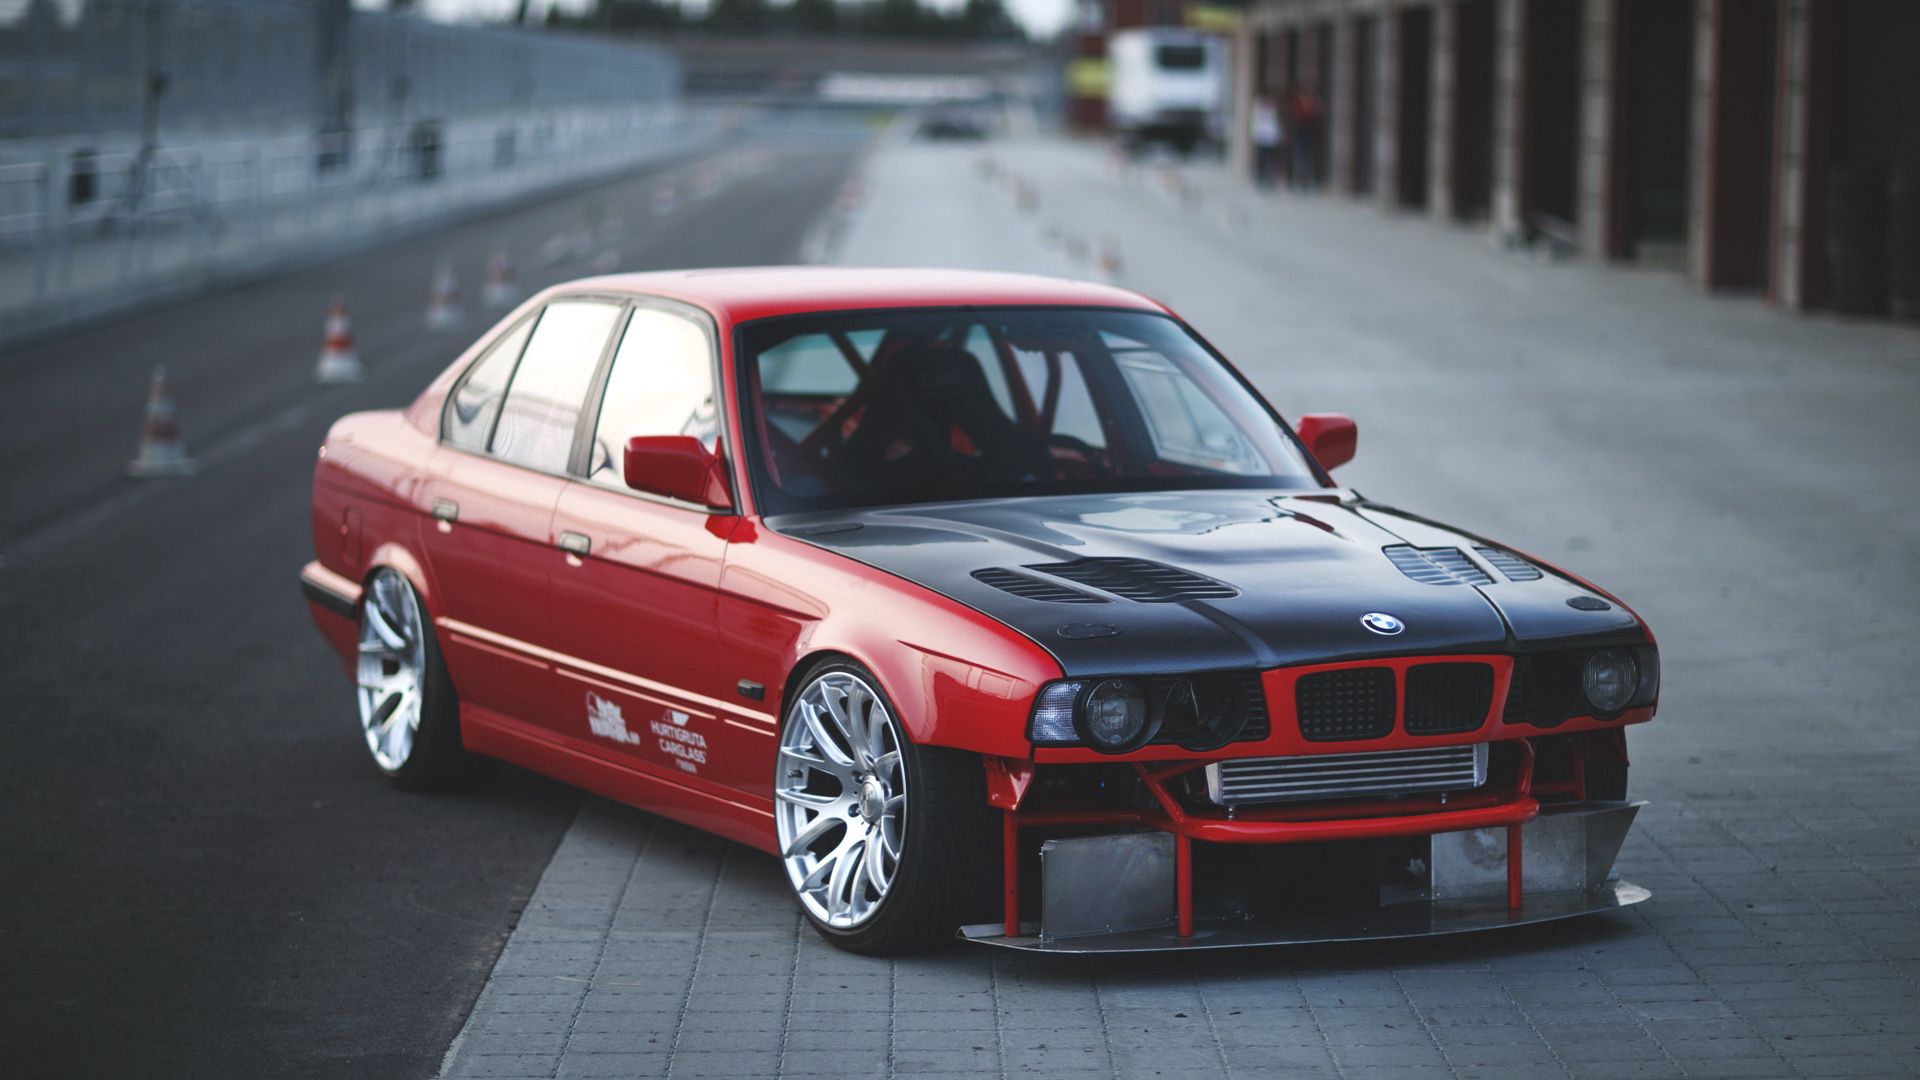 e34, sports, side view, red Cell Phone Image